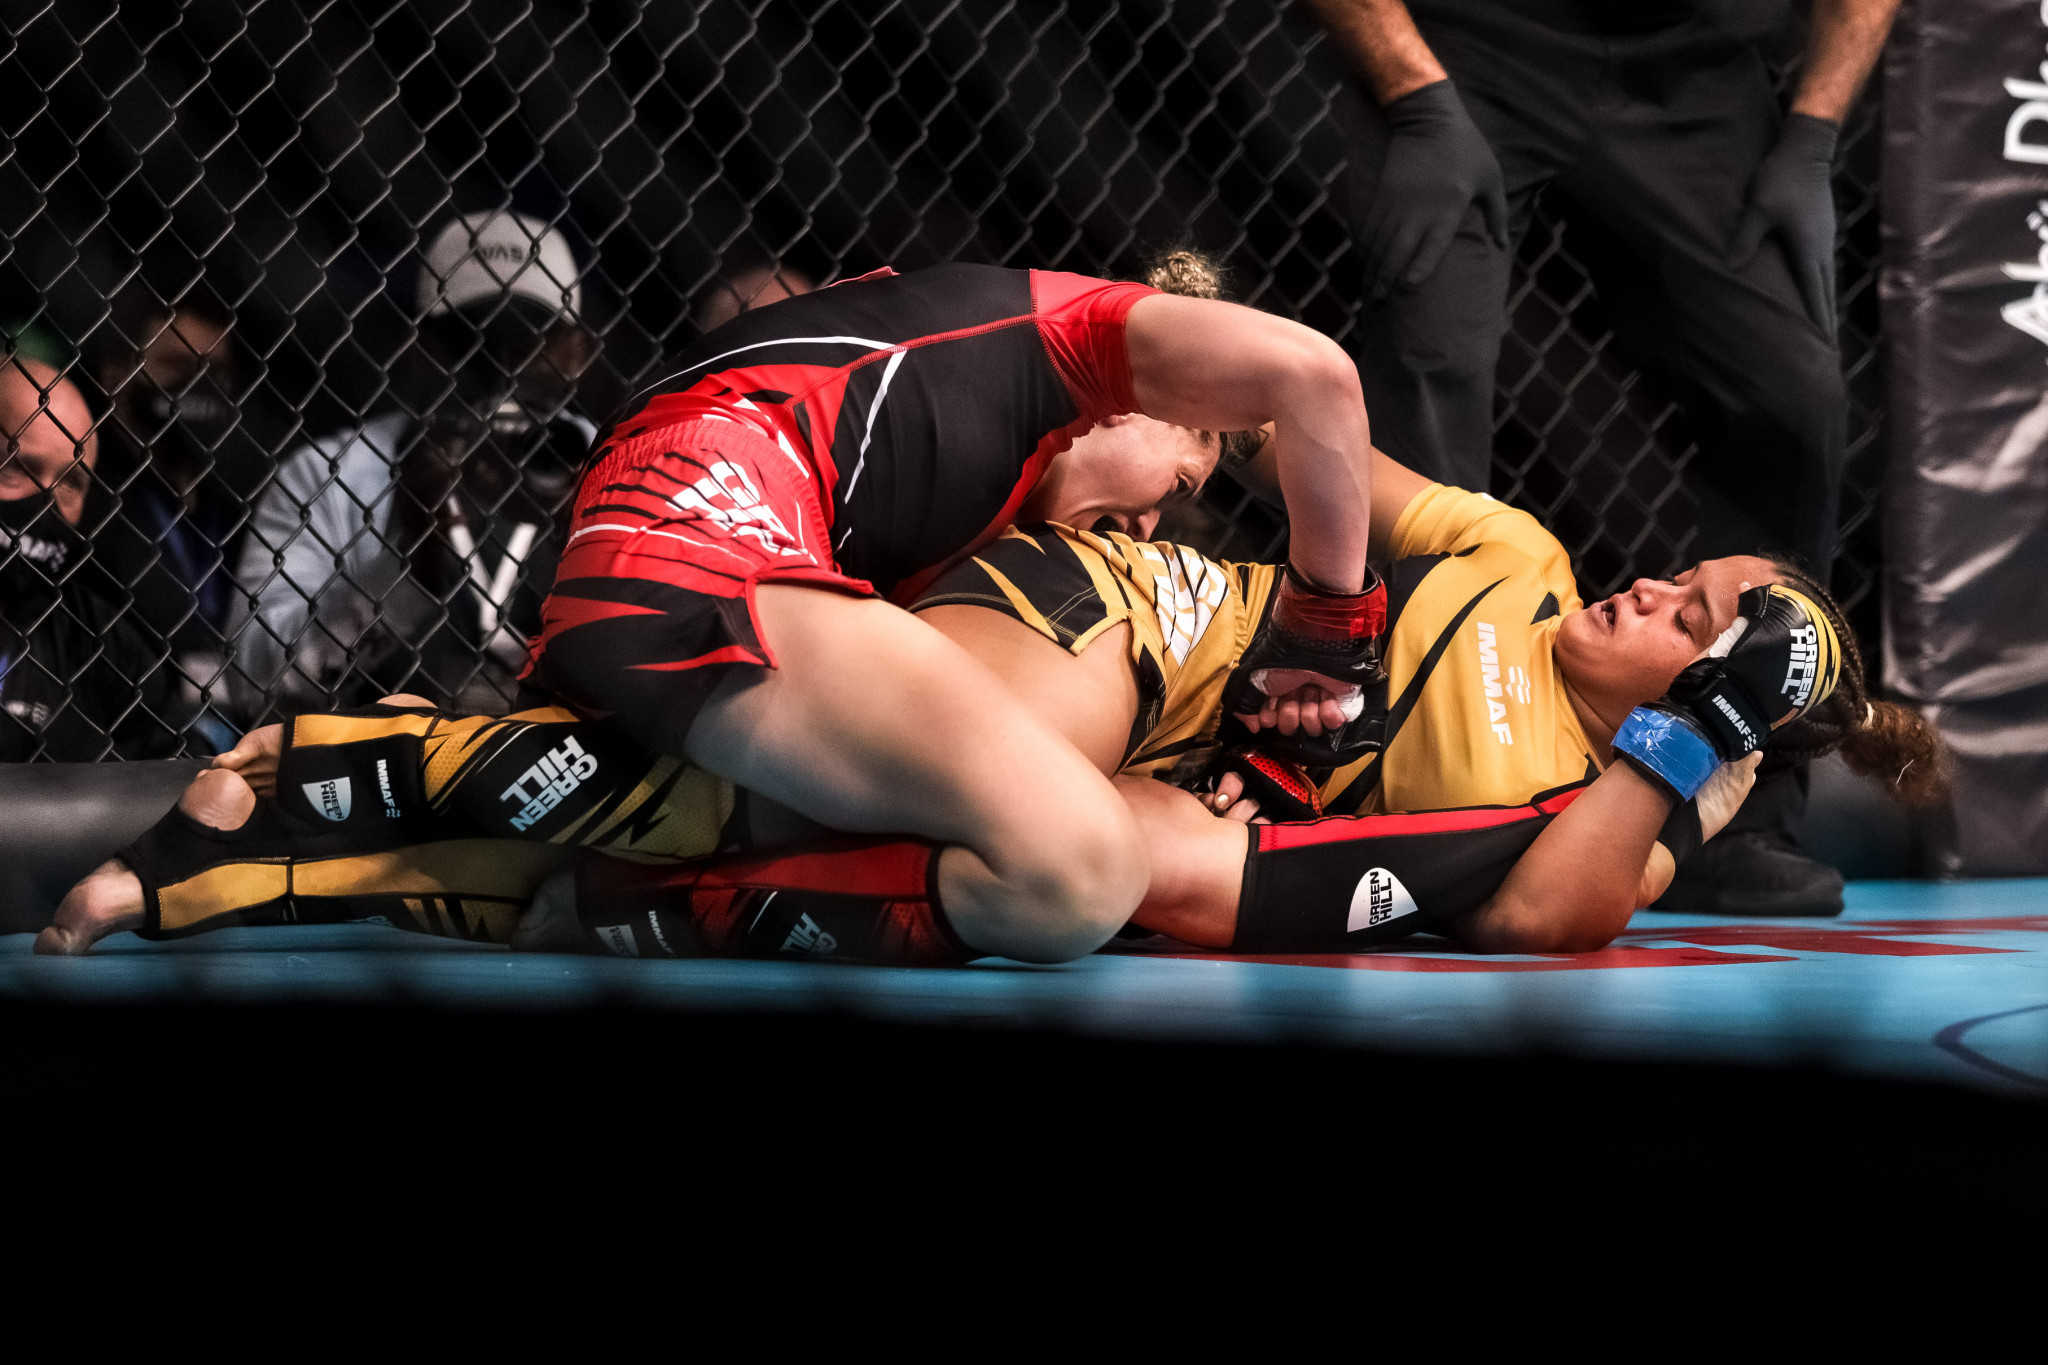 Sabrina Laurentina De Sousa, in gold, continued her featherweight world title defence ©IMMAF